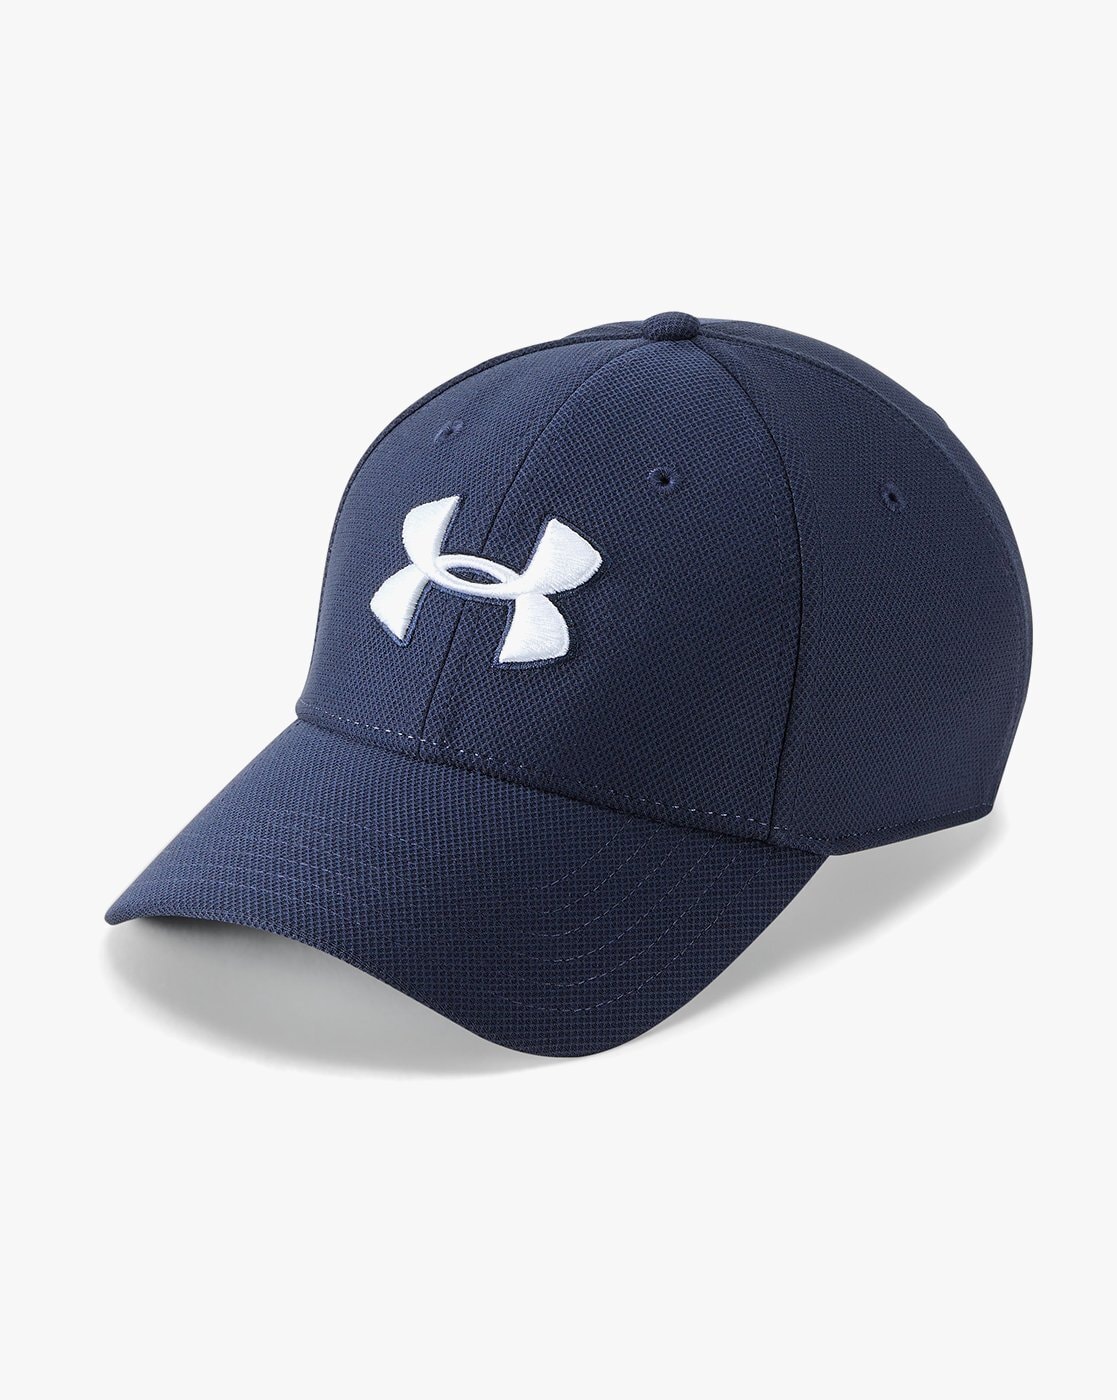 Buy Navy Blue Caps & Hats for Men by Under Armour Online